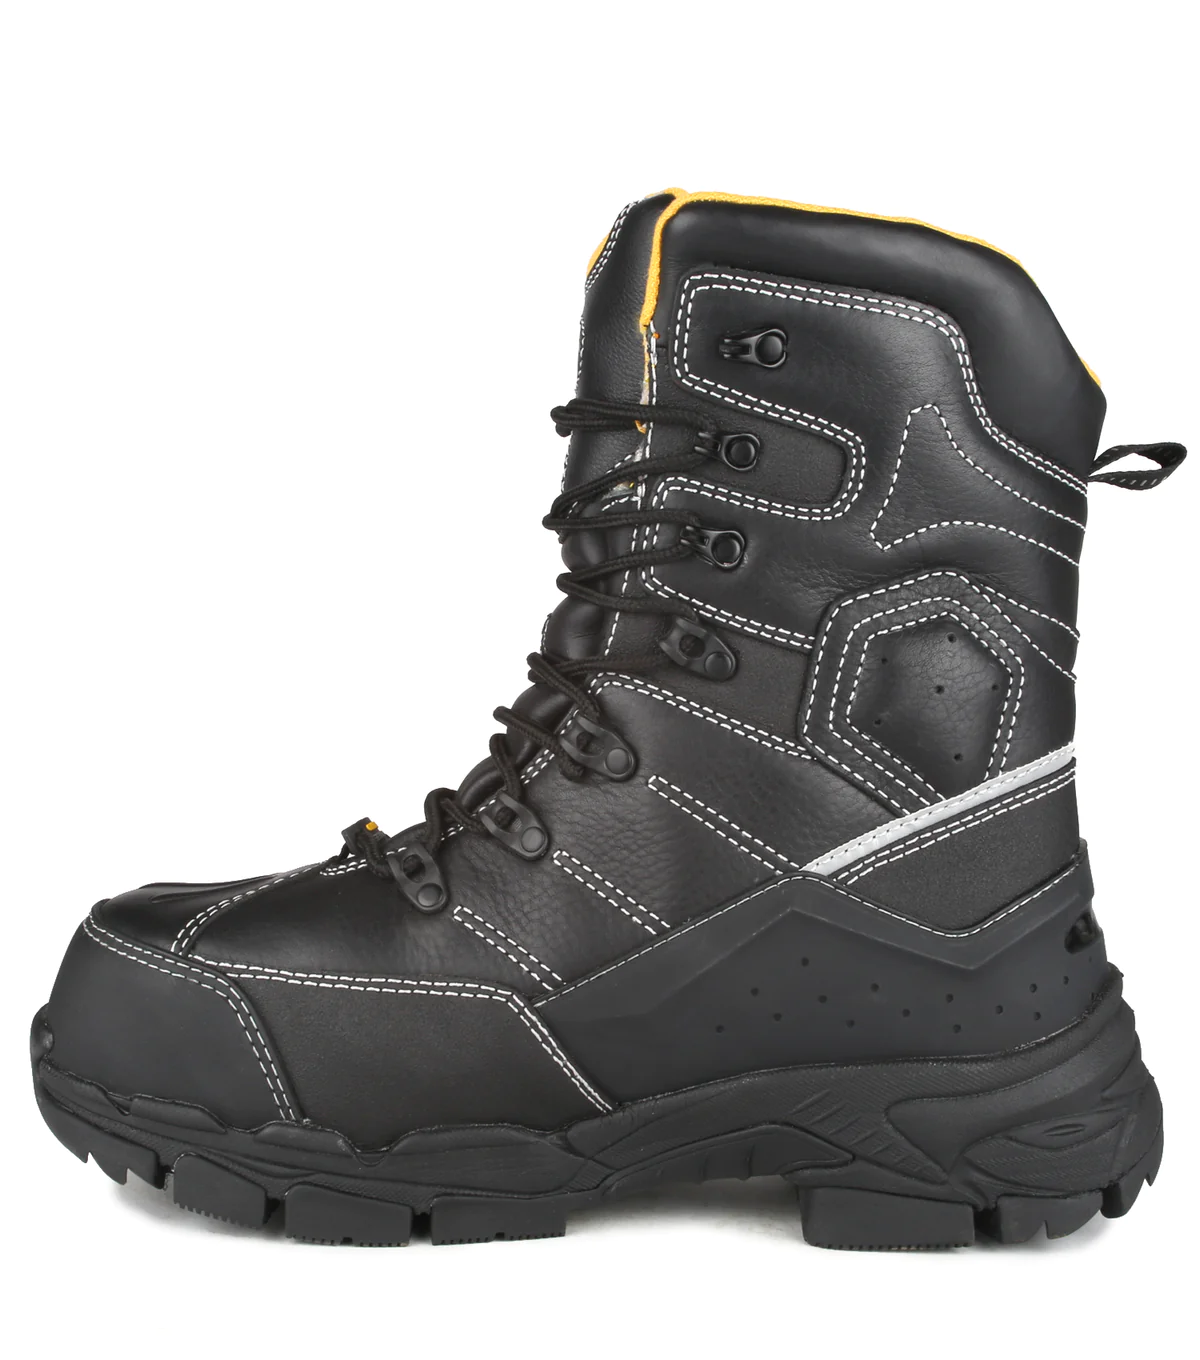 Acton – Boots – #9076-11 – Right